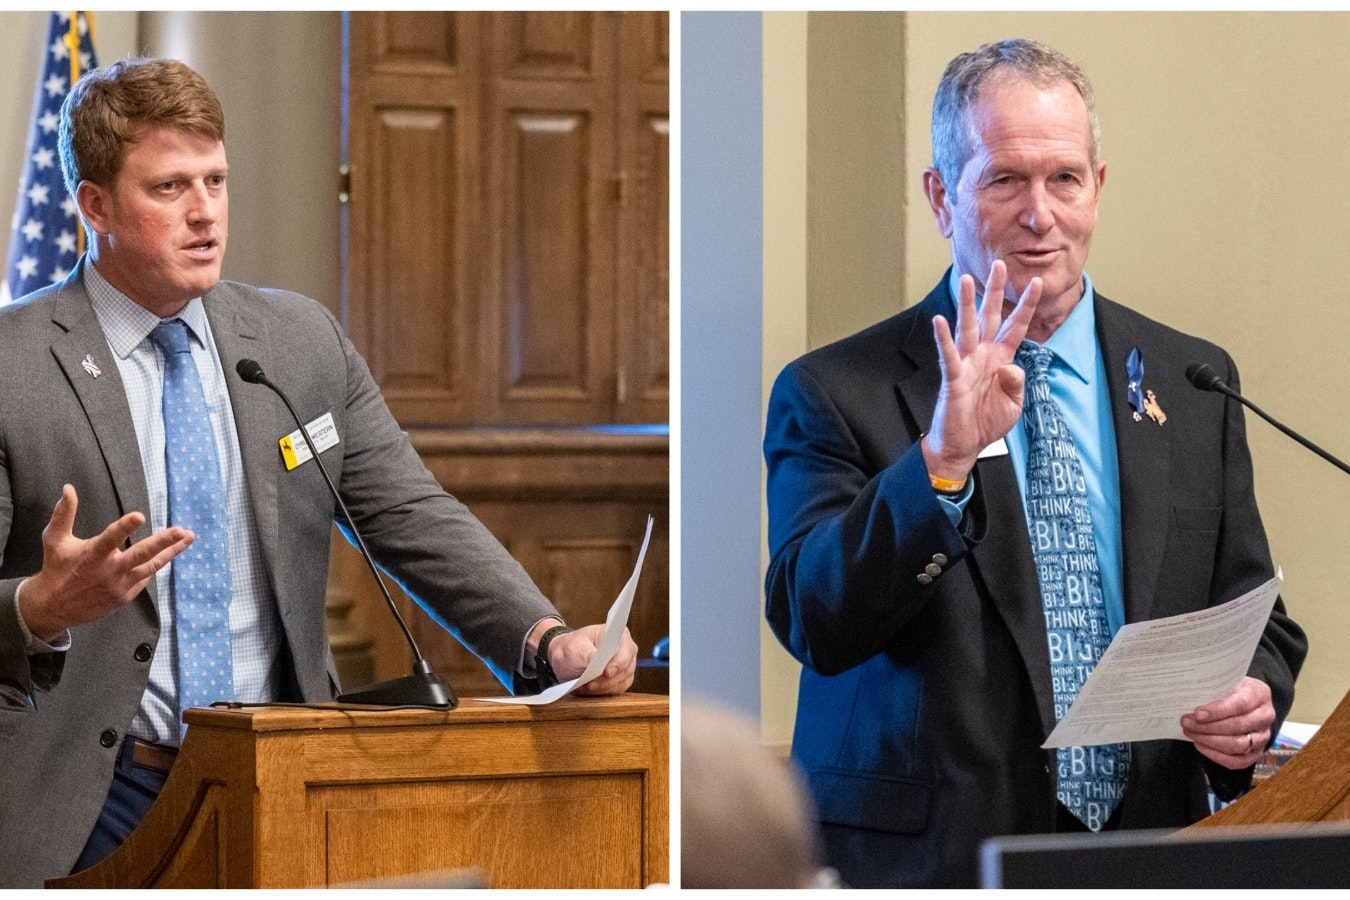 State Reps. Cyrus Western, R-Big Horn, left, and Steve Harshman, R-Casper, spoke passionately about House Bill 203 on Friday.